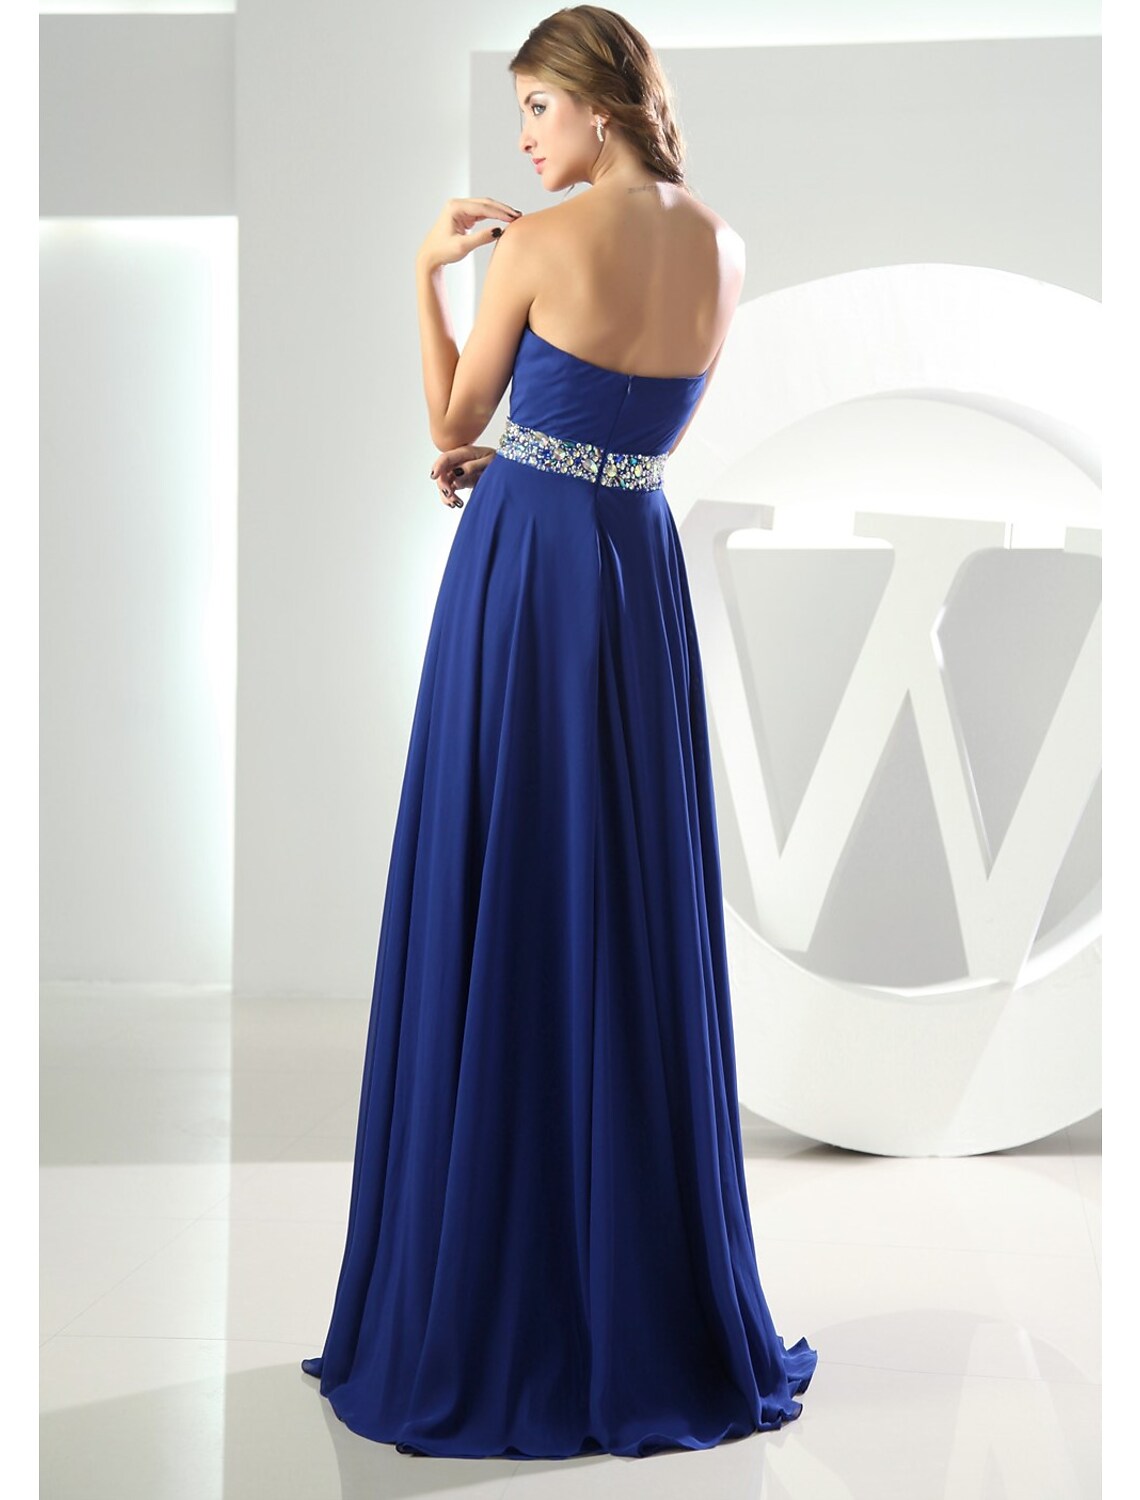 A-Line Evening Gown Dress Wedding Floor Length Sleeveless Sweetheart Chiffon with Crystals